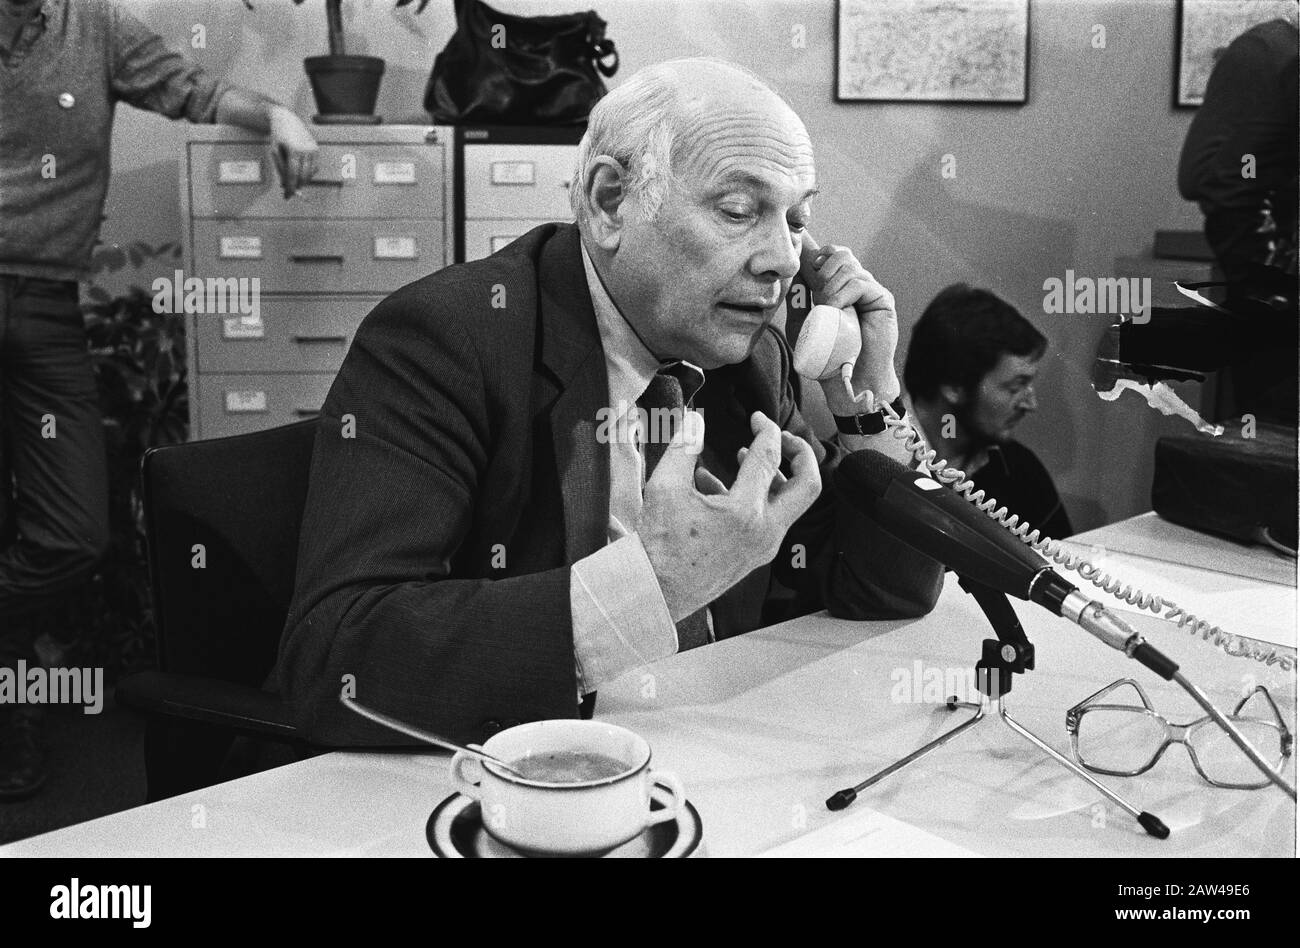 PvdA top members answered the phone at office party PvdA in Amsterdam. Den Uyl on the phone Date: March 11, 1982 Location: Amsterdam, Noord-Holland Keywords: ministers, political parties Person Name: Uyl, Joop den Stock Photo